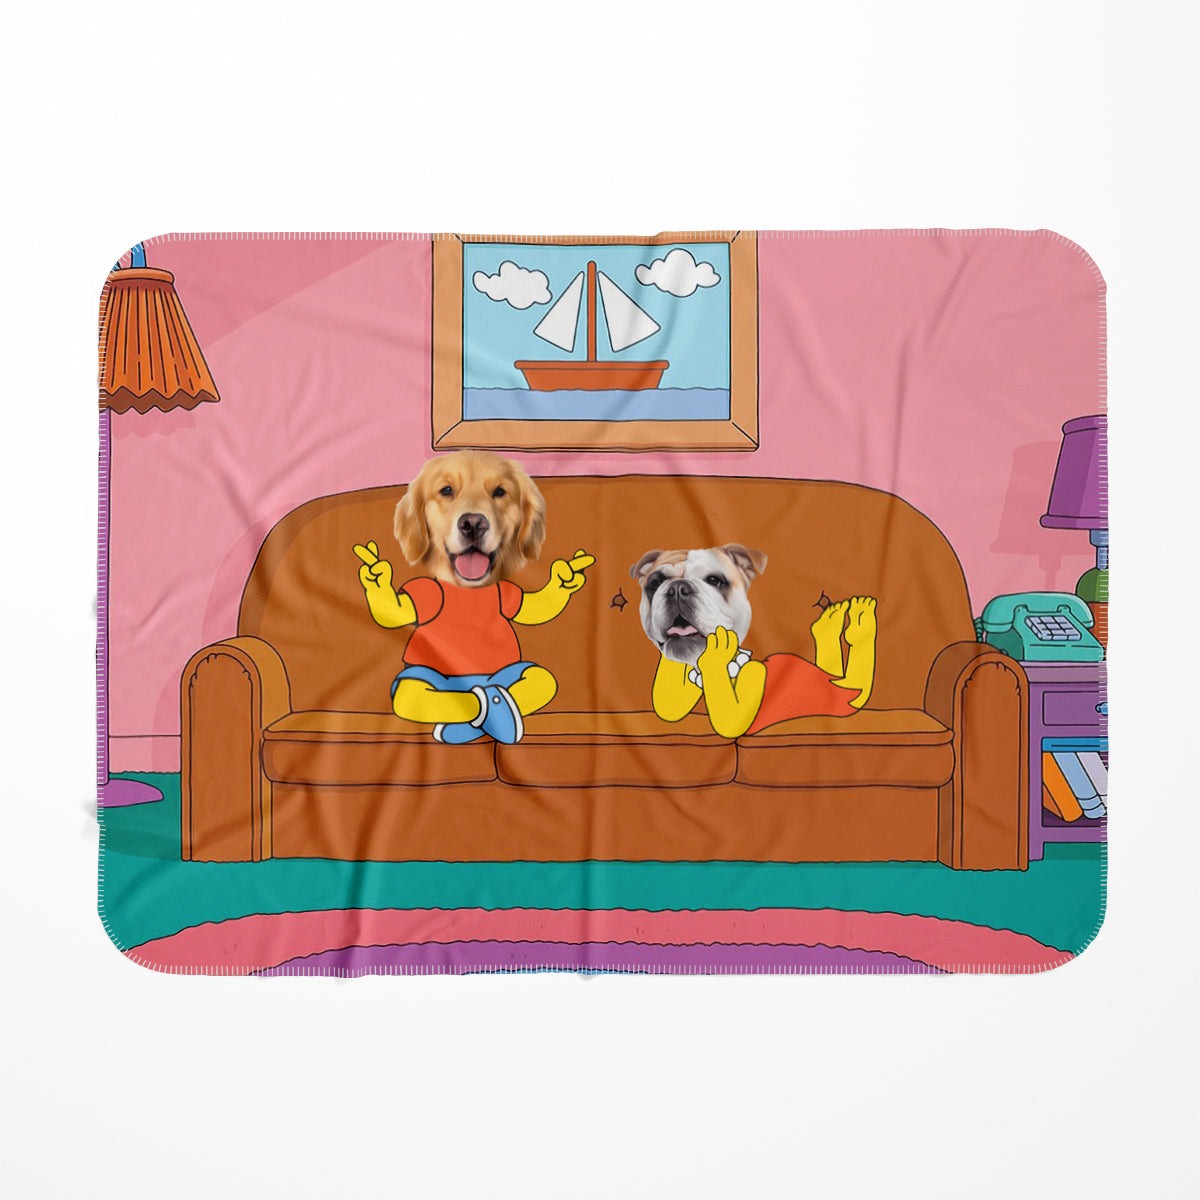 The Simpson (Bart and Lisa): Paw & Glory, pawandglory, blanket with your dog on it, dog picture blanket, custom cat blanket, custom pet blanket, personalized dog blanket, custom dog blanket, Pet Portrait blanket,